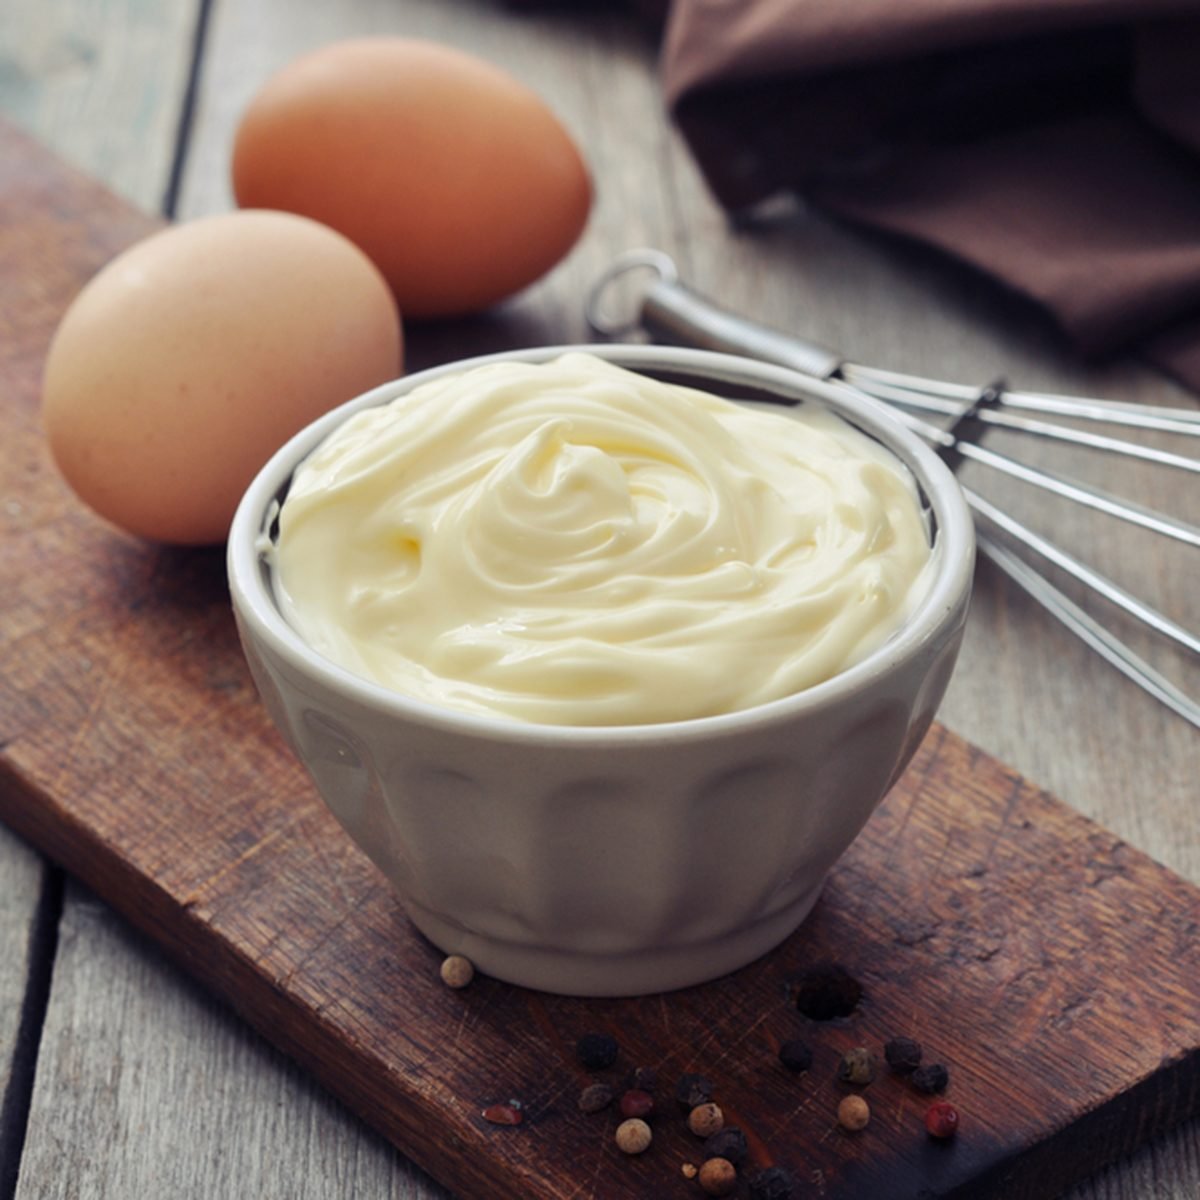 Mayonnaise: Important Facts, Health Benefits, and Recipes - Relish